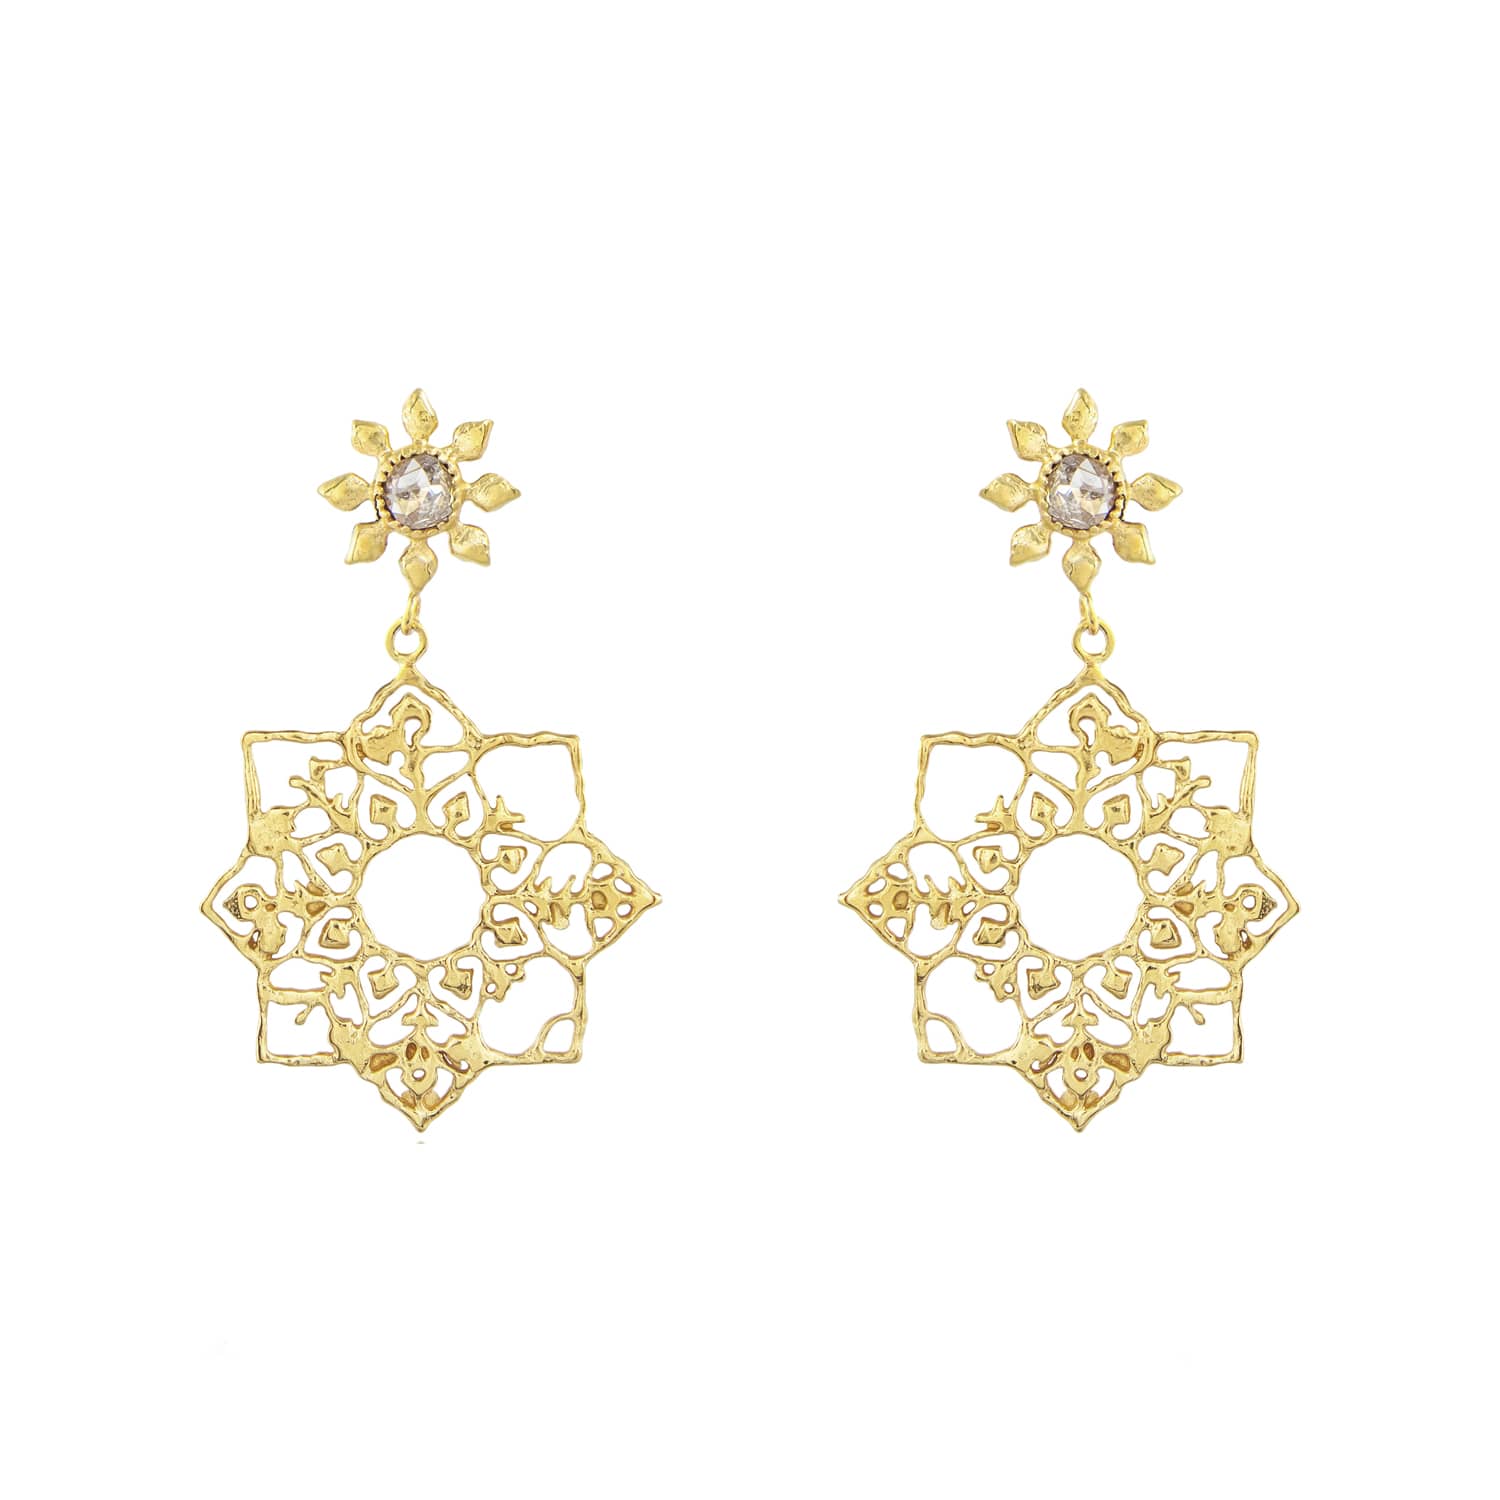 Natalie Perry Jewellery, Small Full Bloom Solid Gold Earrings